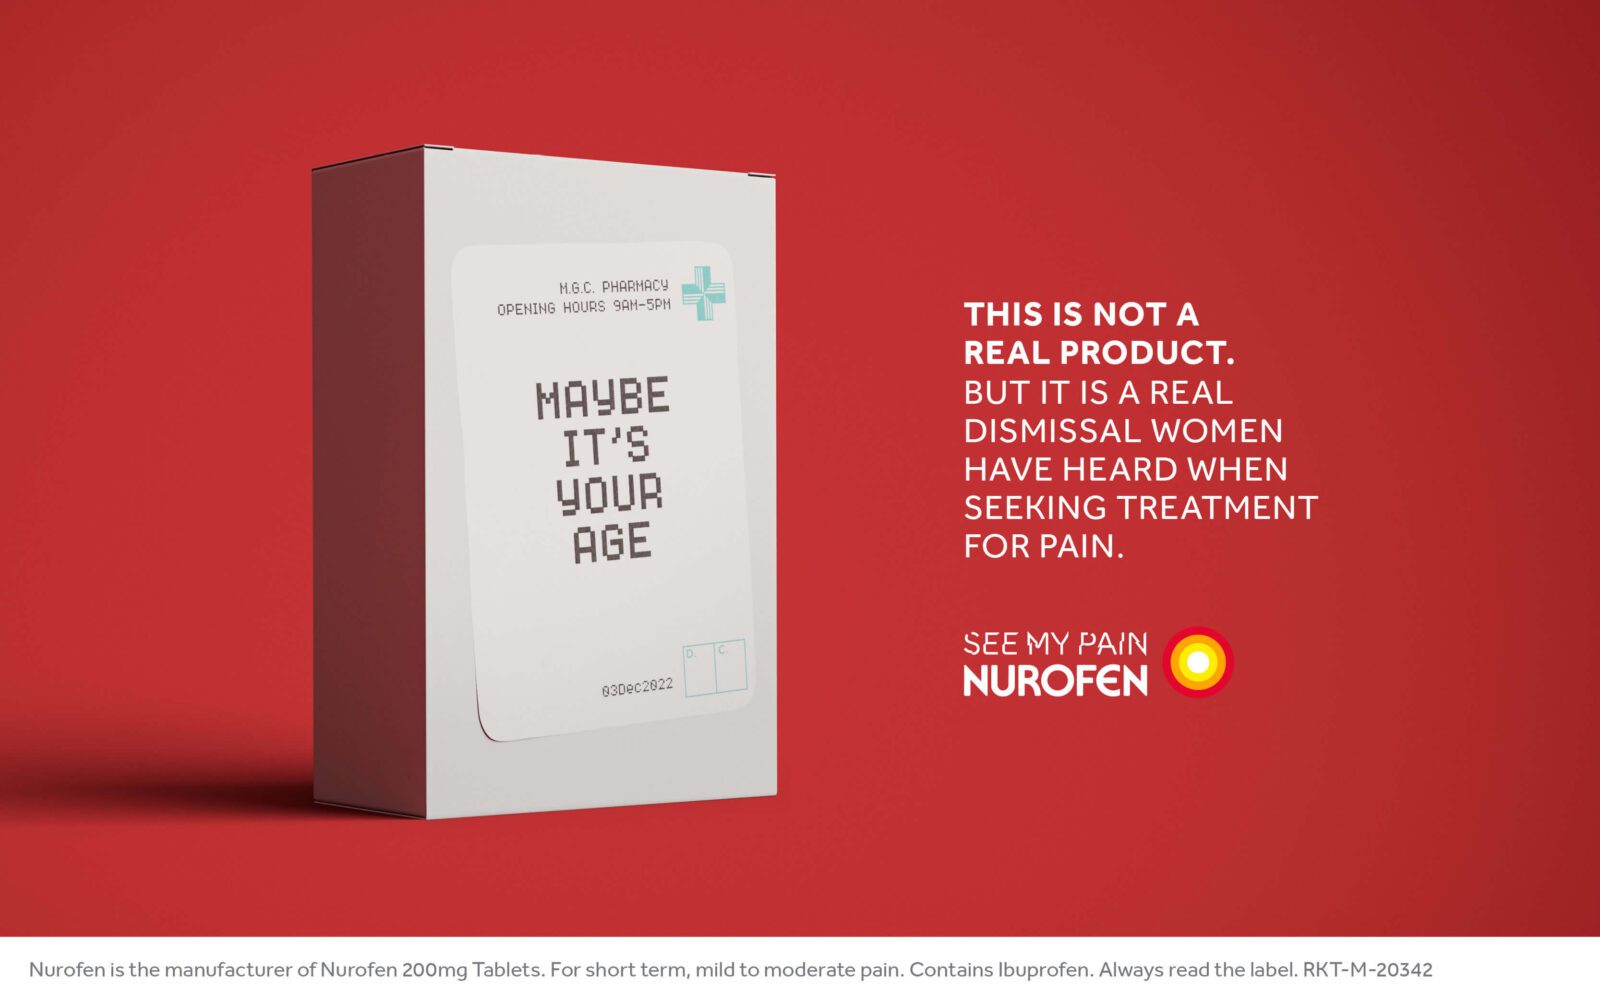 Maybe it's your age? Nurofen fake packaging - See My Pain Campaign